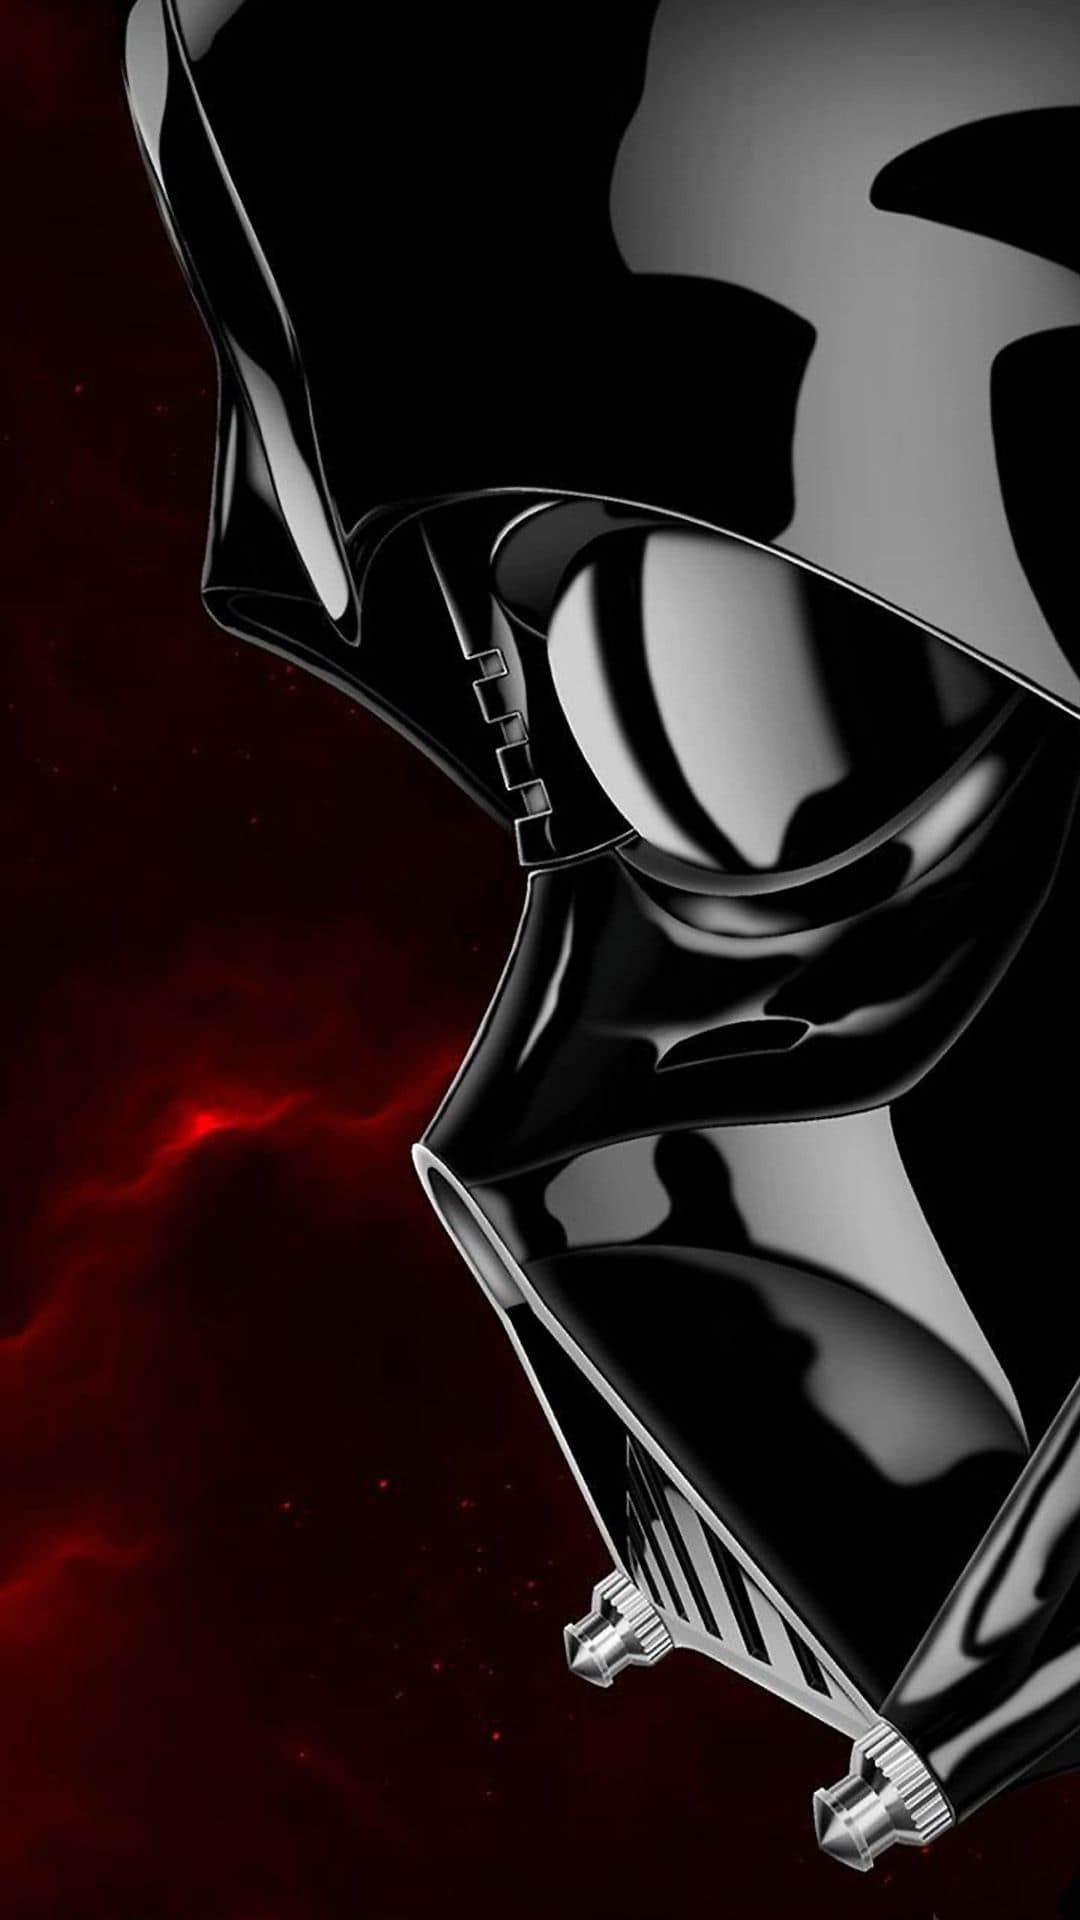 Star Wars Android Wallpaper Free Star Wars Android